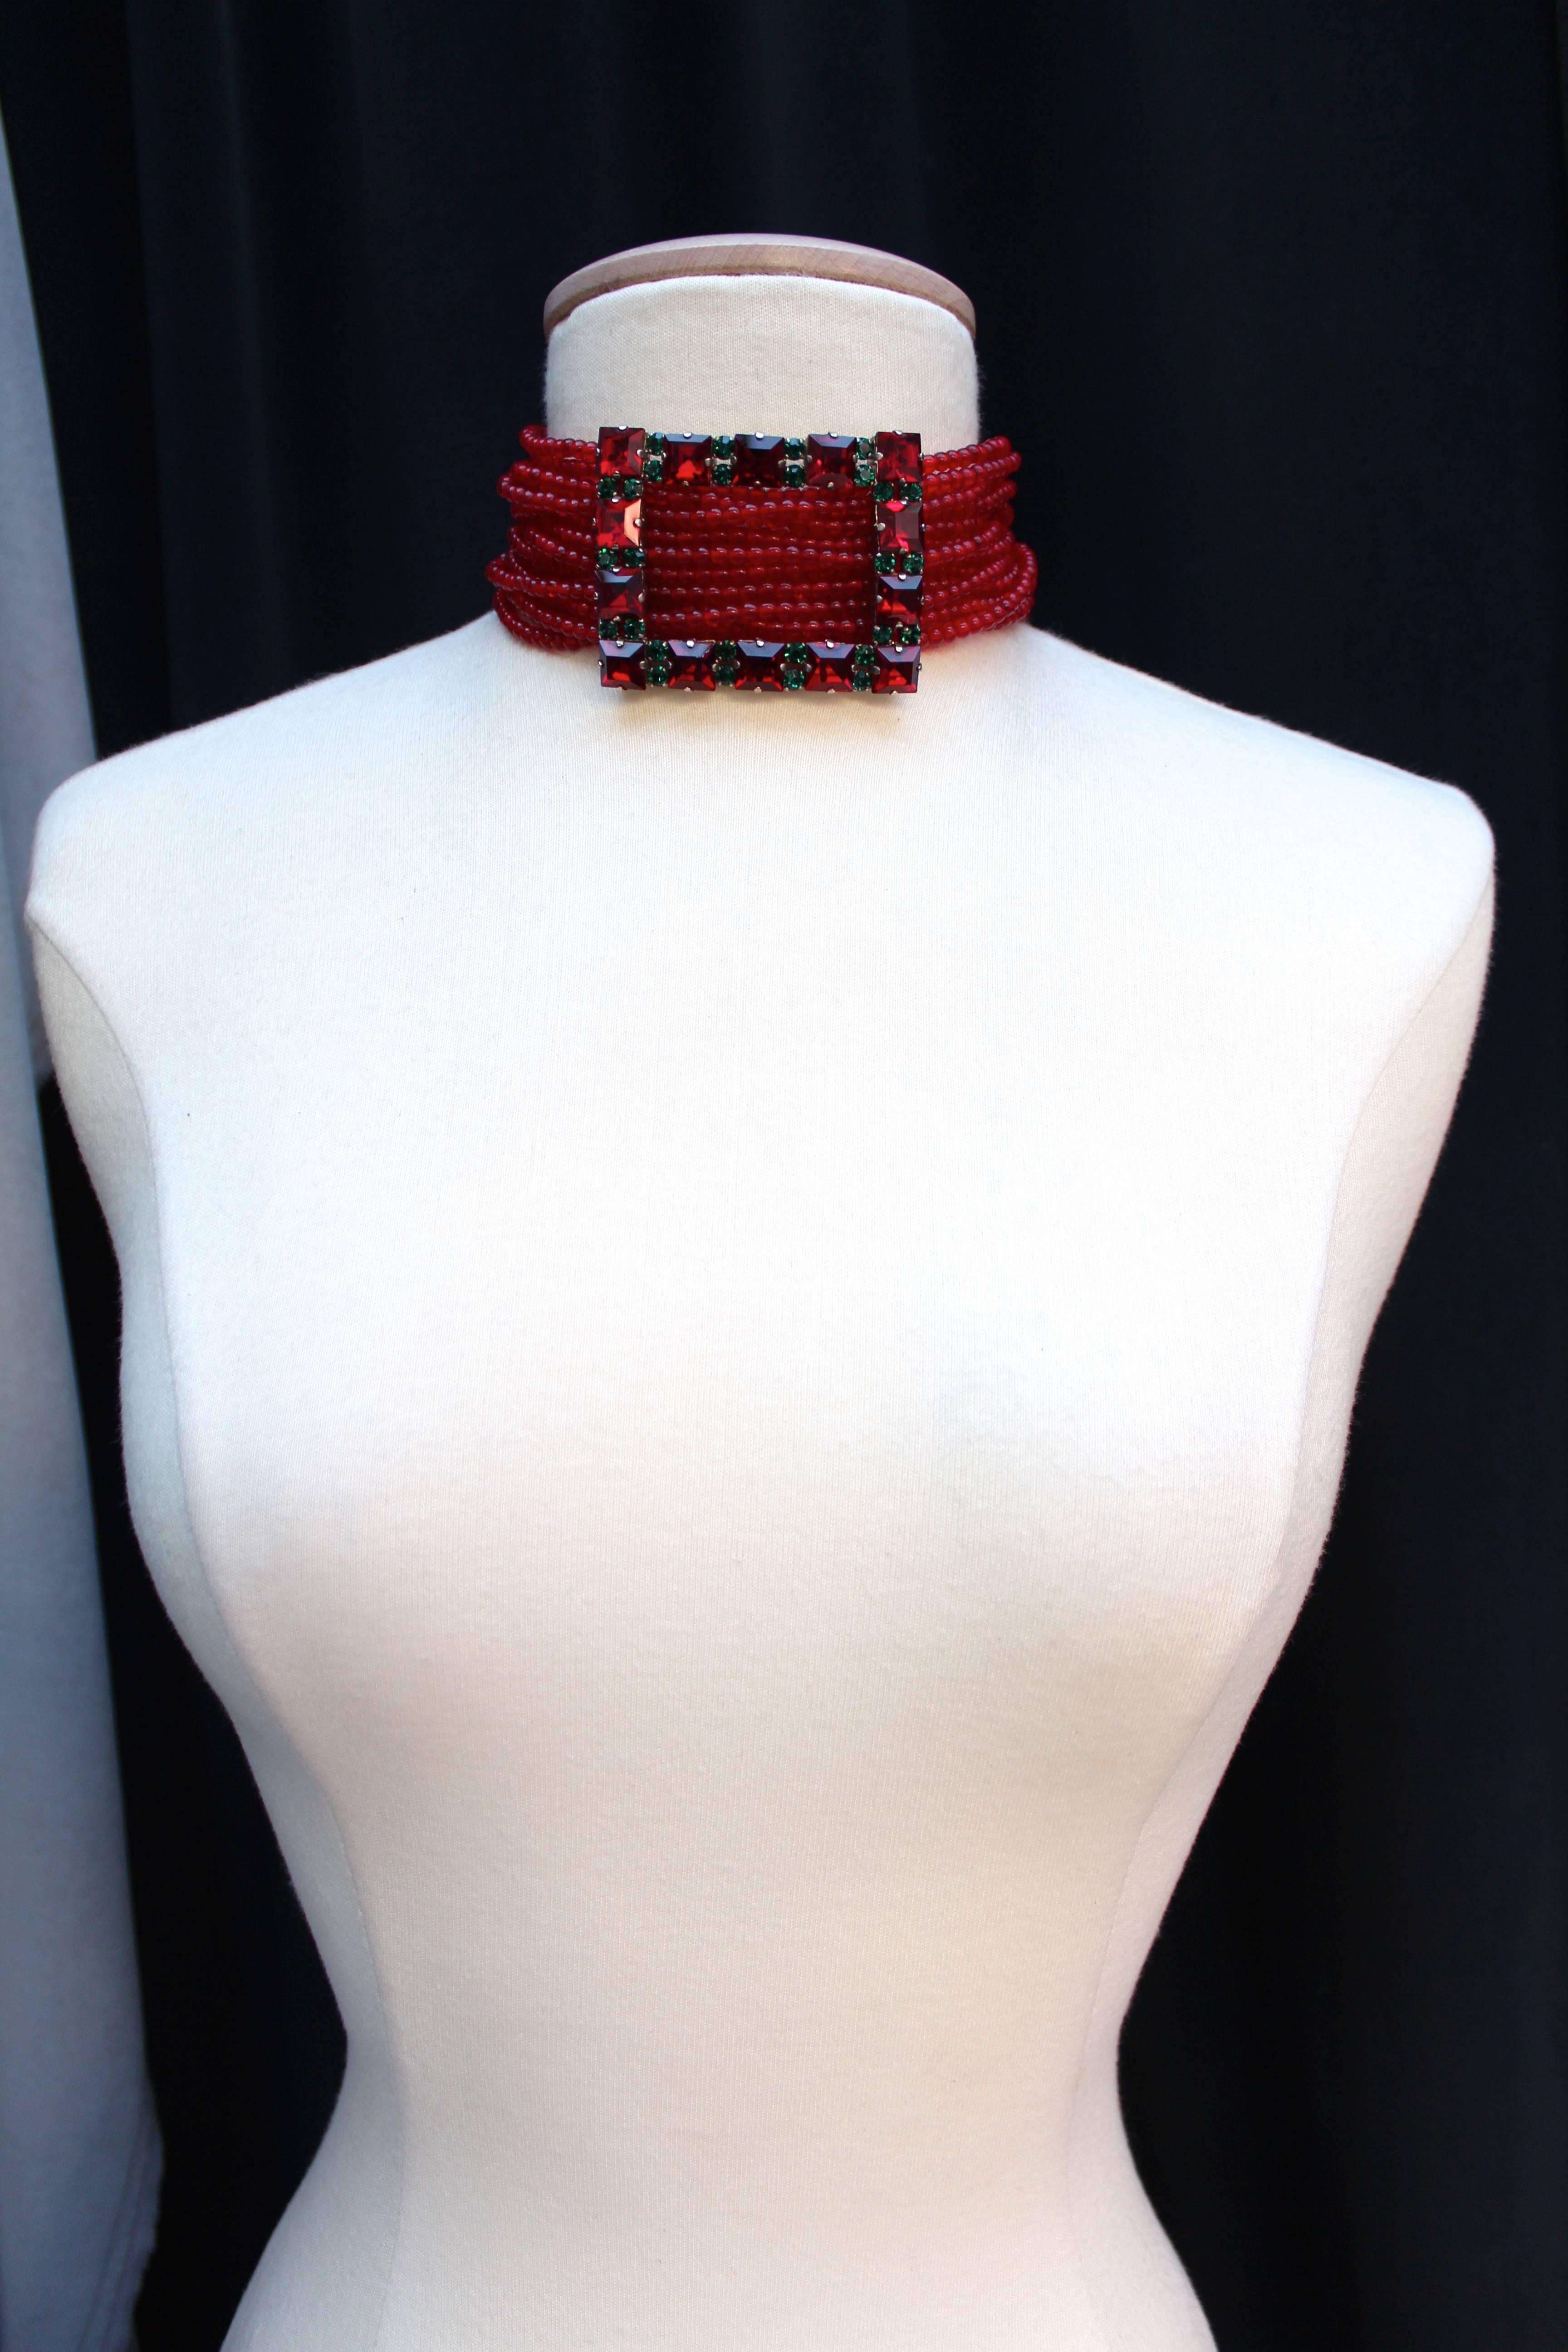 YVES SAINT LAURENT Choker necklace composed of multiple strands of red beads held in the center with a buckle in silver metal paved with red and green crystals. 

The necklace fastens with a S hook in silver metal engraved with YSL. 

Very good